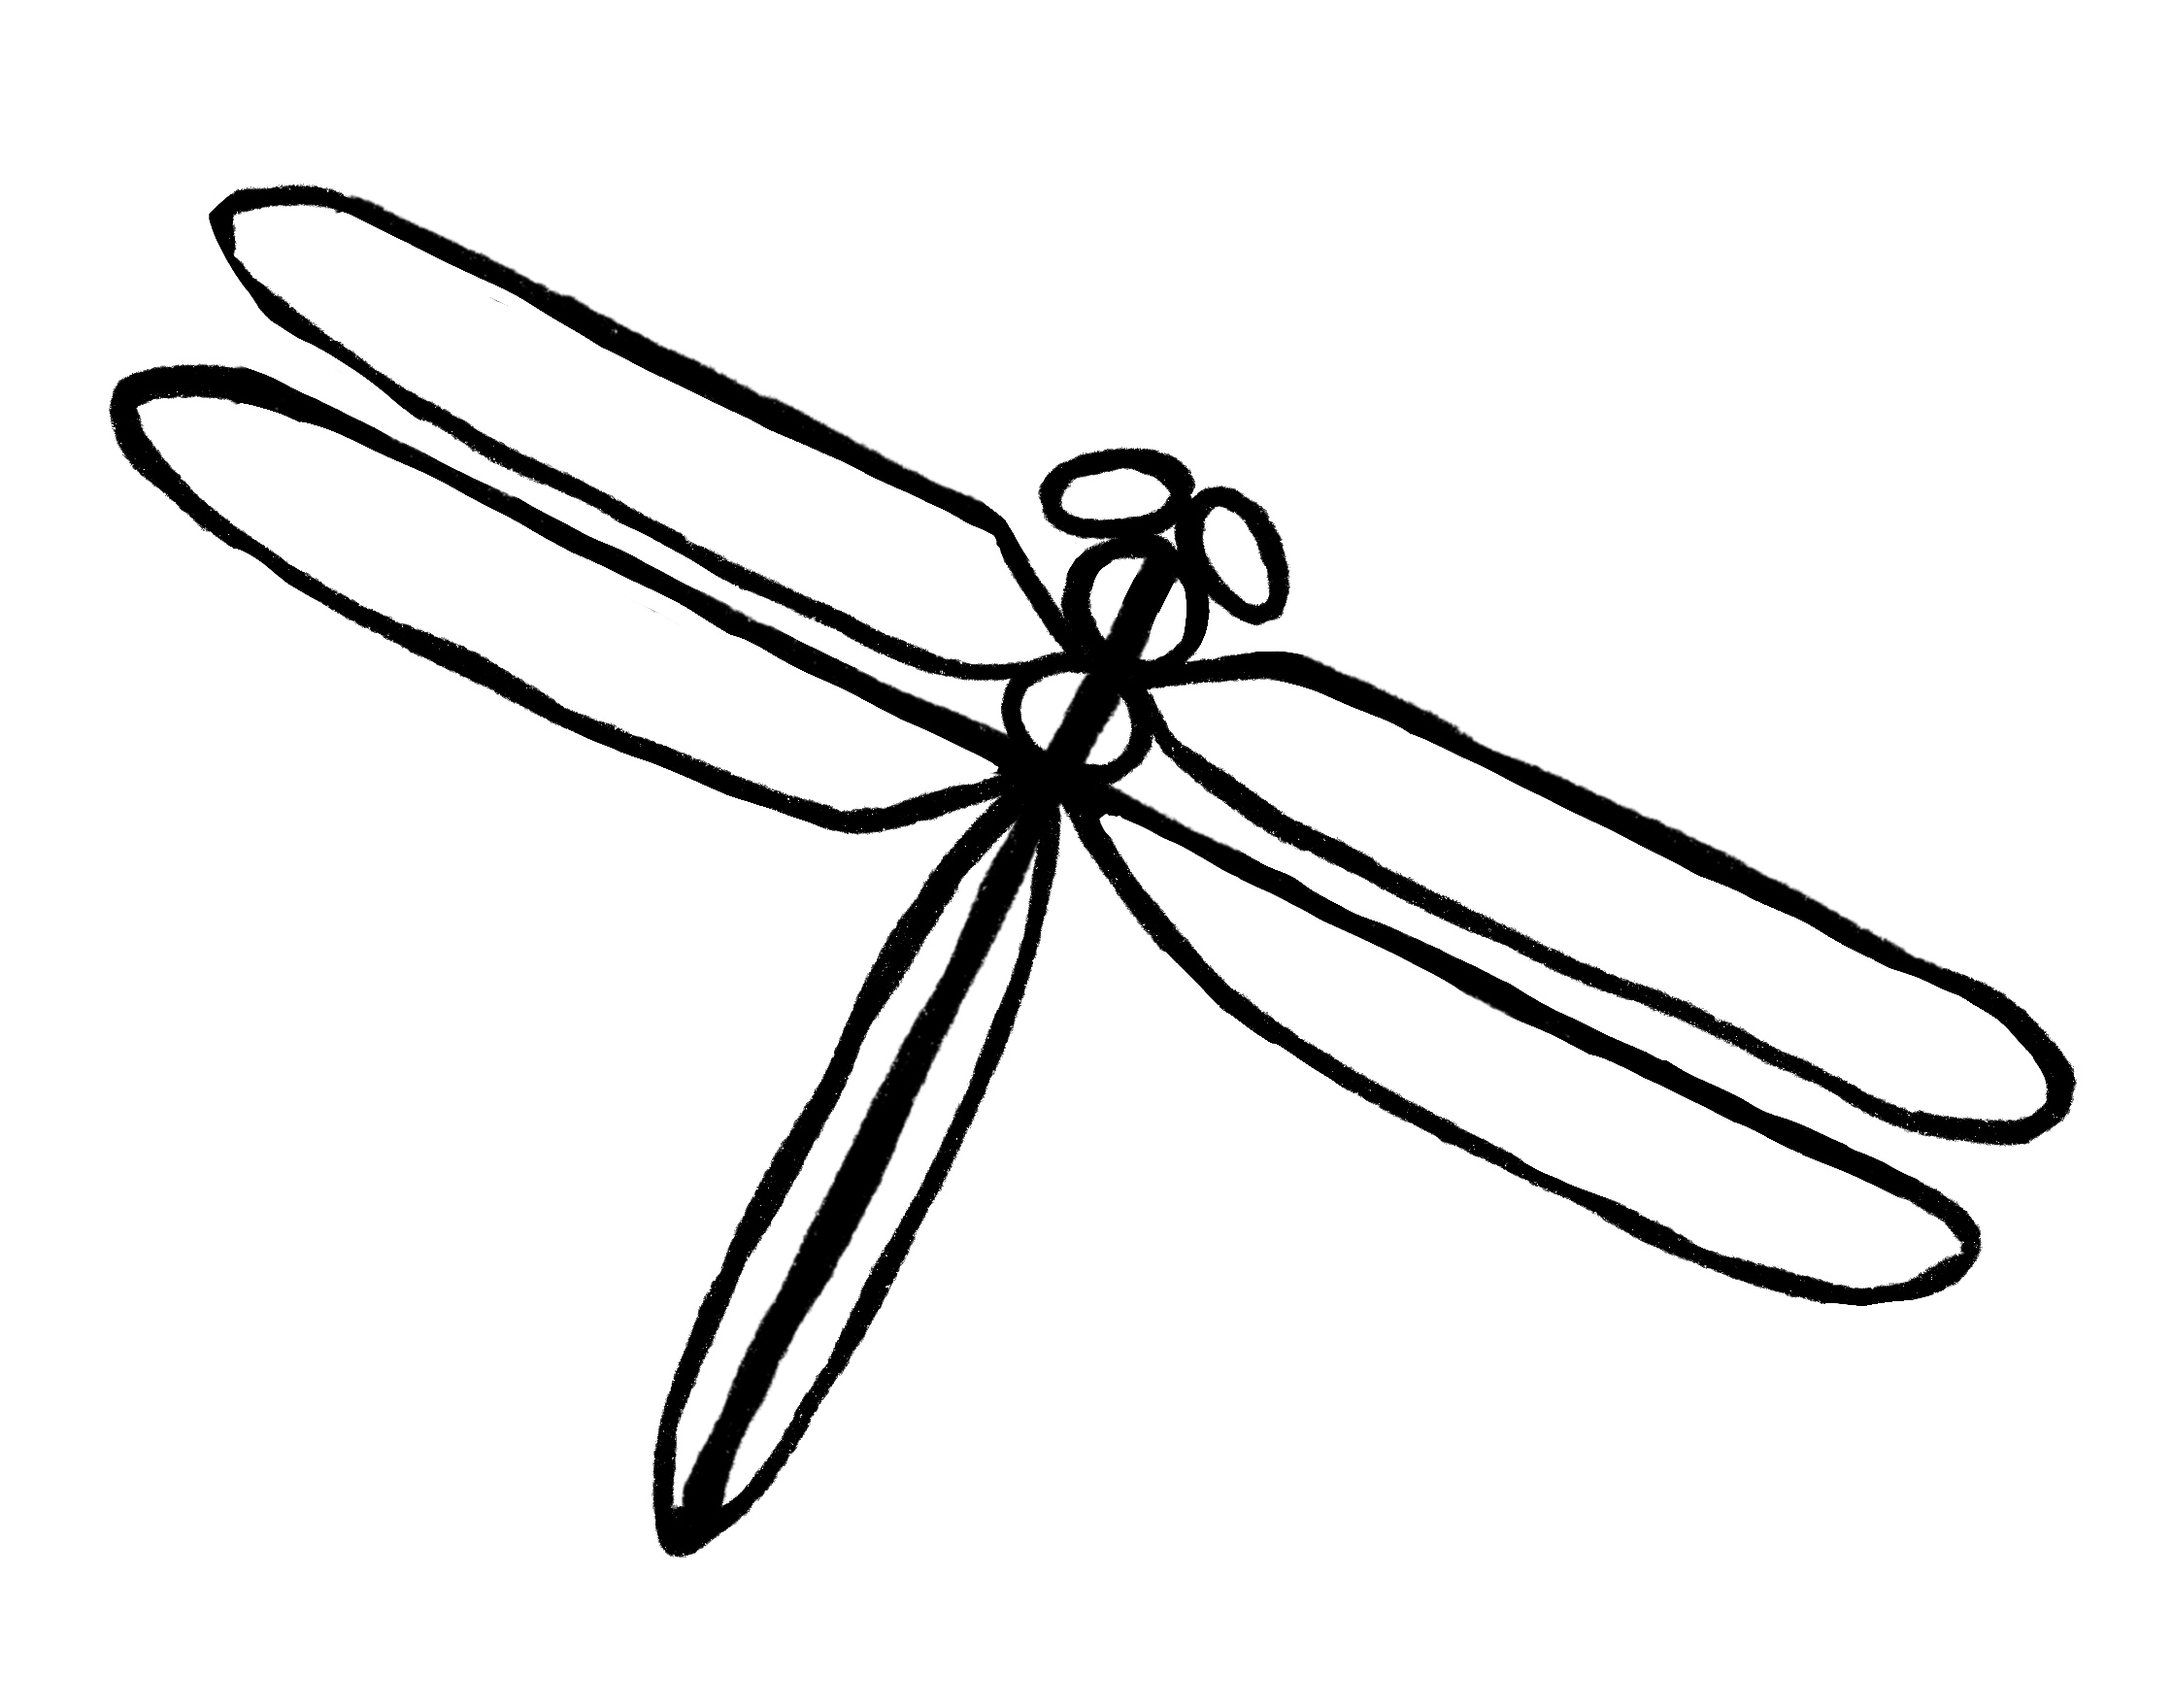 Dragonfly Sketch lesson